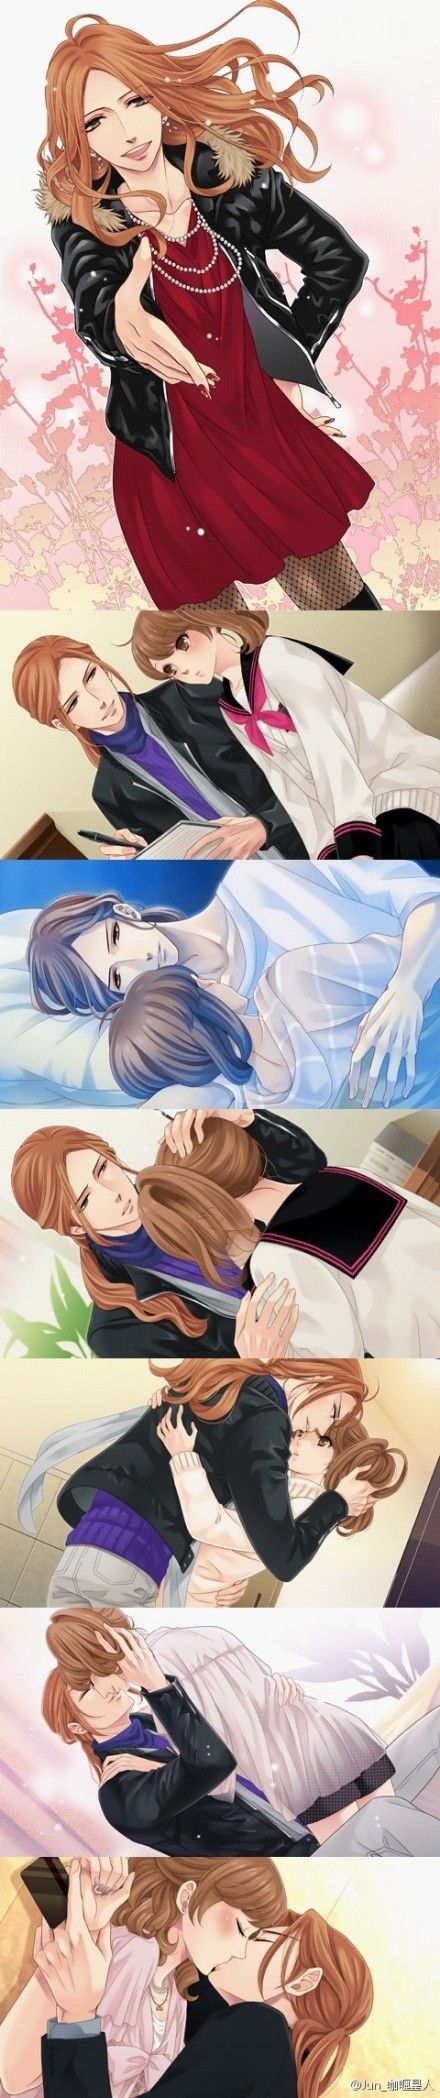 Brothers conflict: Hikaru and Ema - I like the last one.